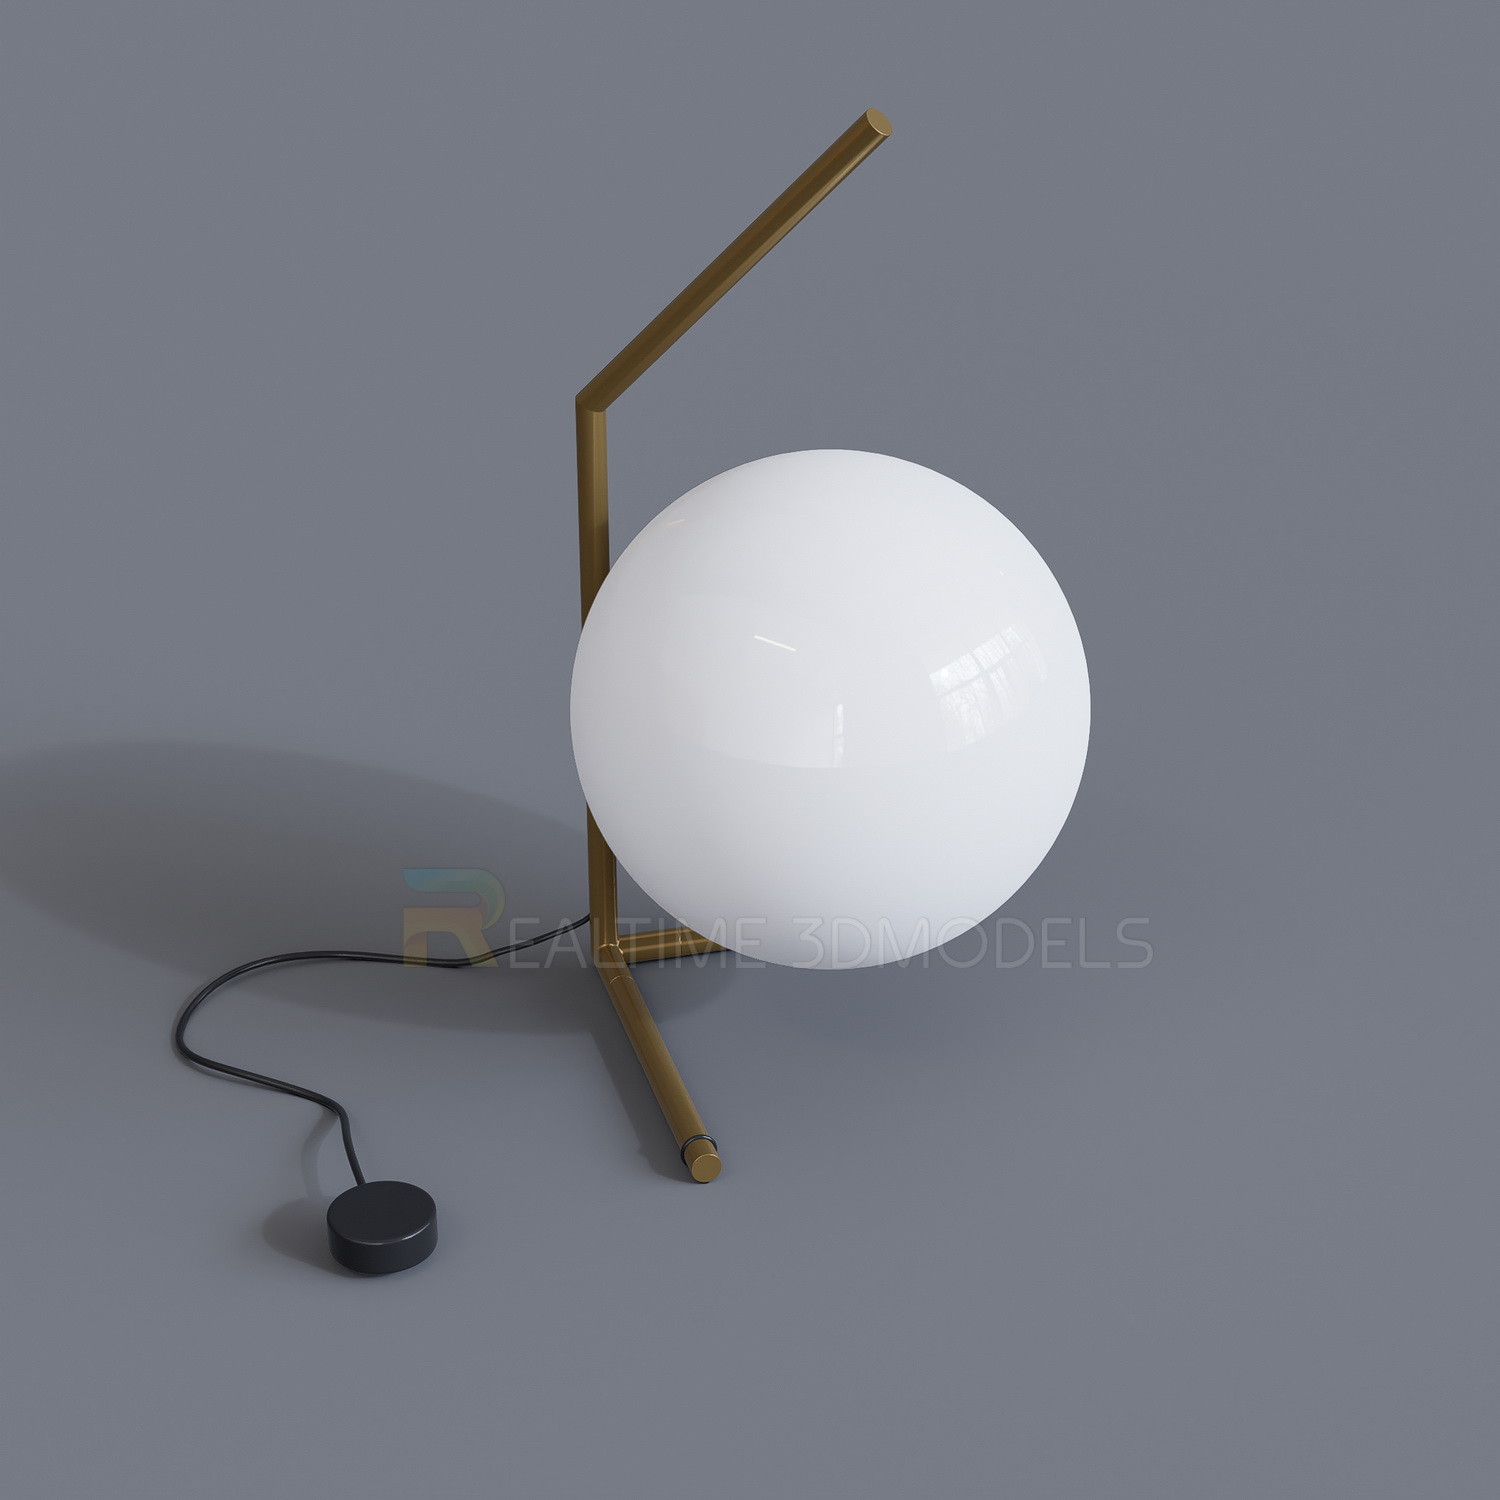 Realtime3d-01085